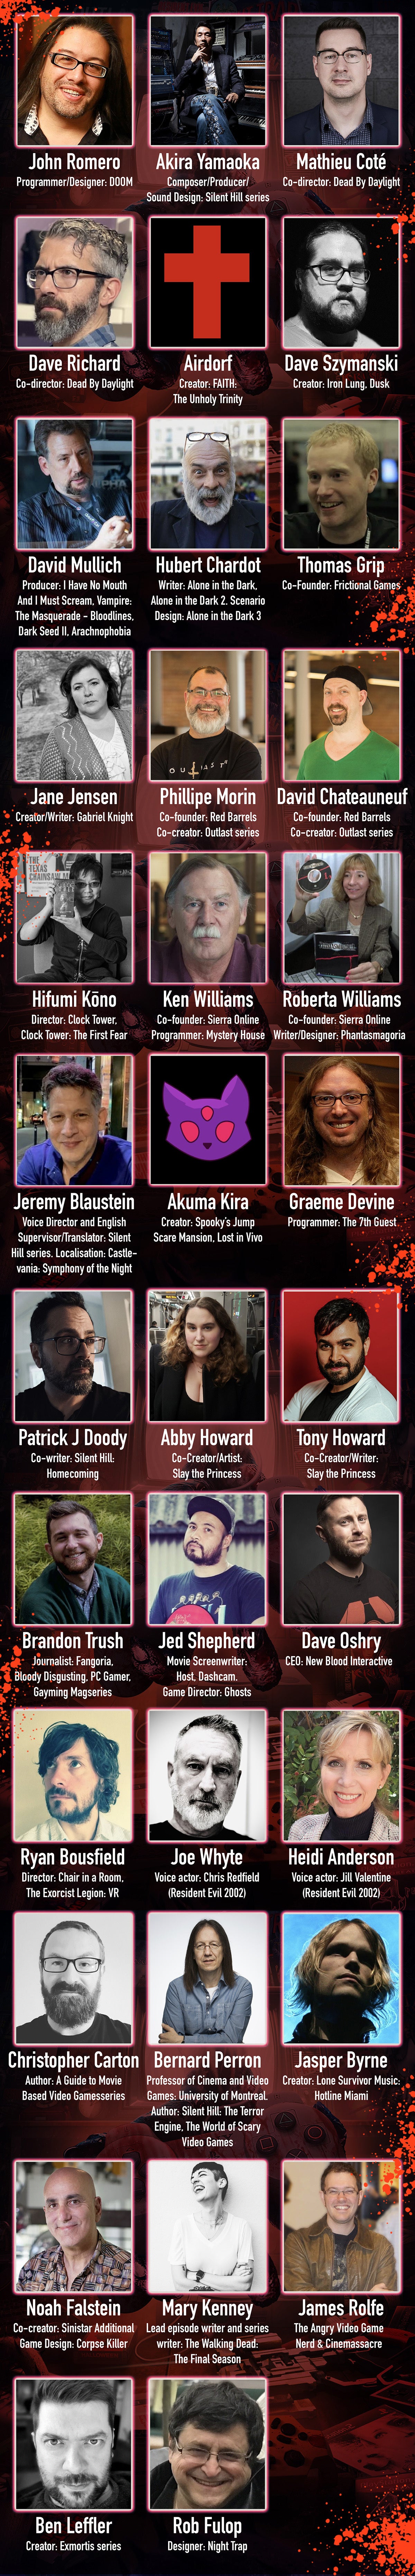 An image with headshots, names, and most-noteworthy horror-related roles for the 35 confirmed cast members of TerrorBytes: The Evolution of Horror Gaming documentary series.